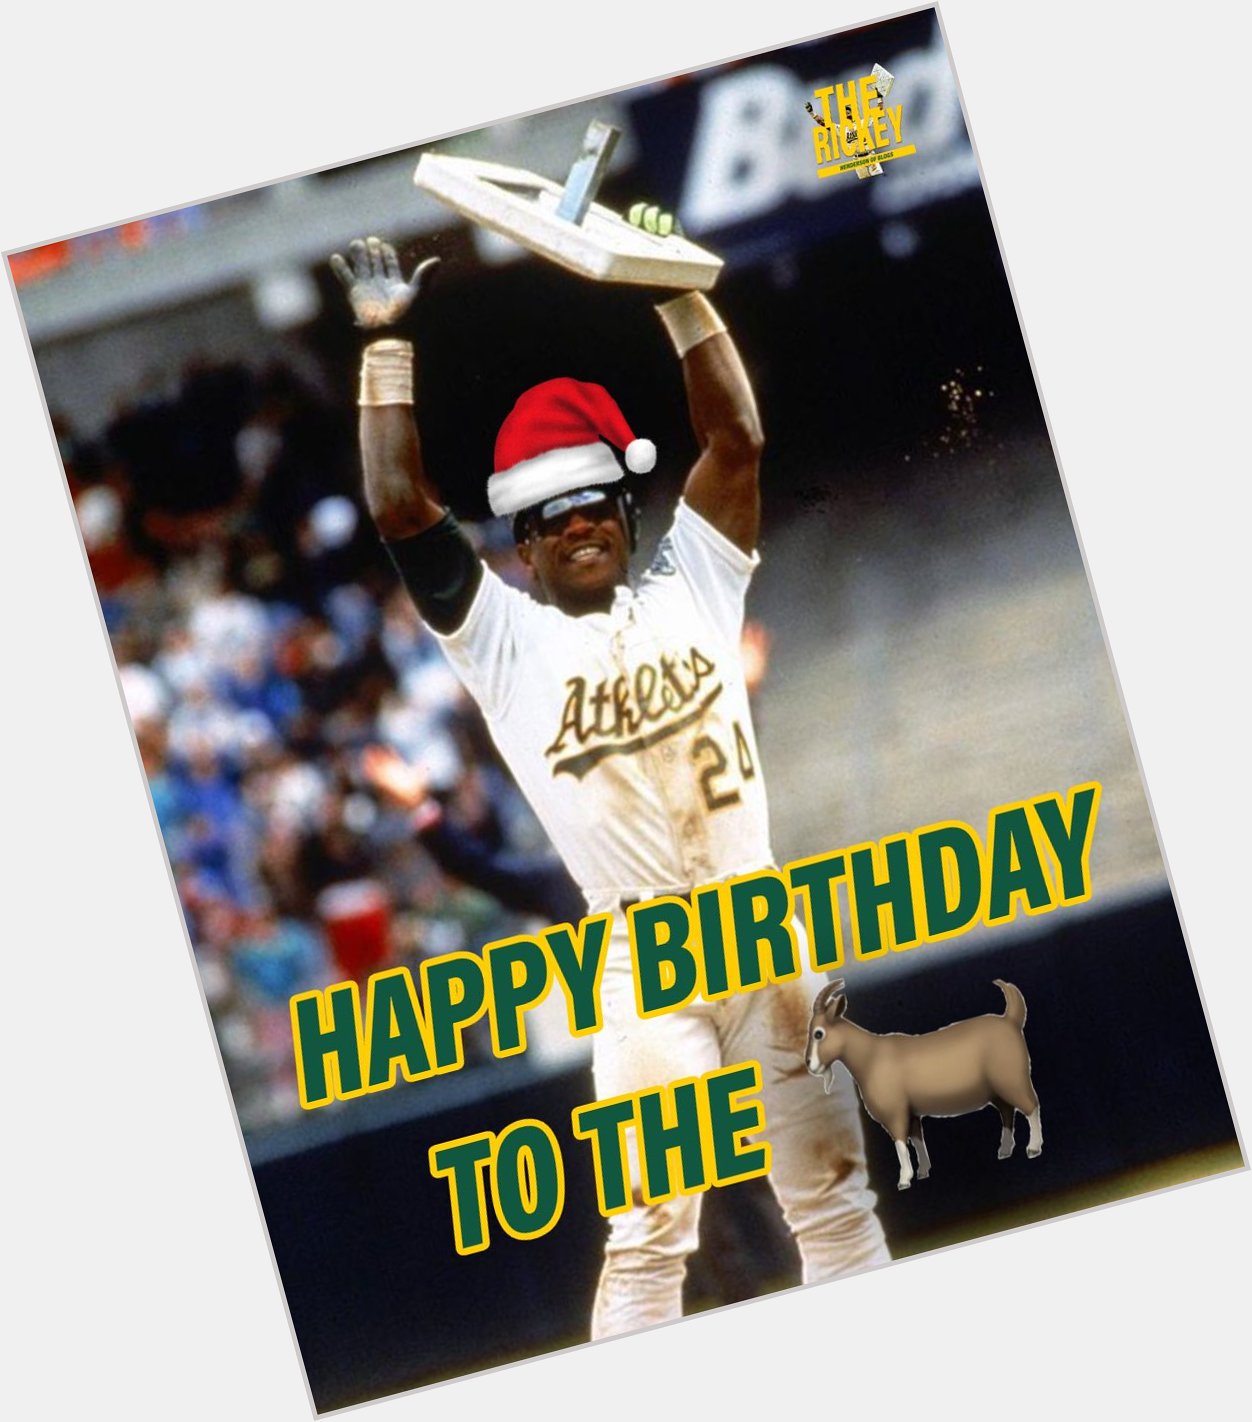 Happy birthday to Rickey Henderson and Jesus in that order 